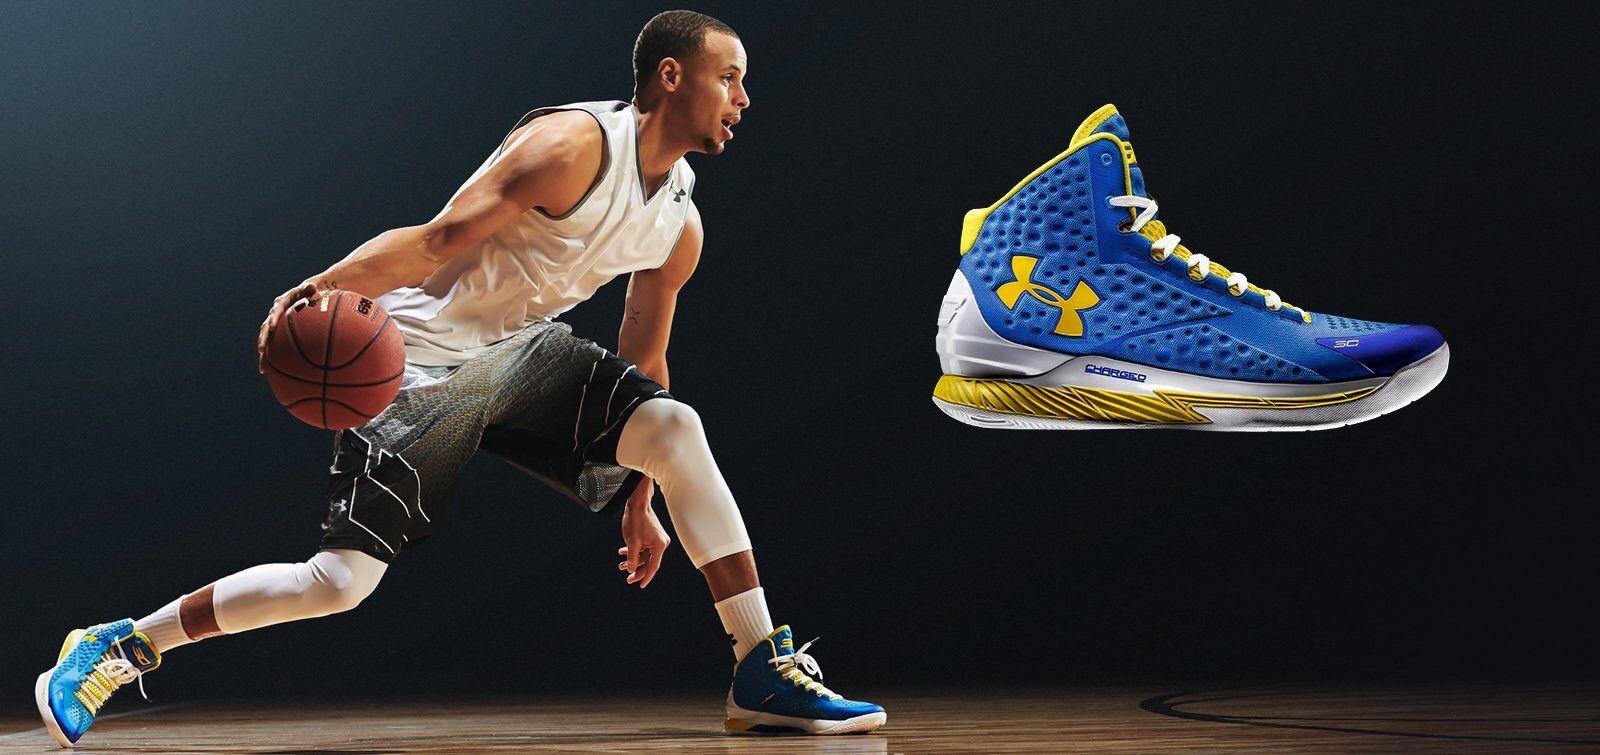 Stephen Curry Under Amour Shoes wallpaper 2018 in Basketball